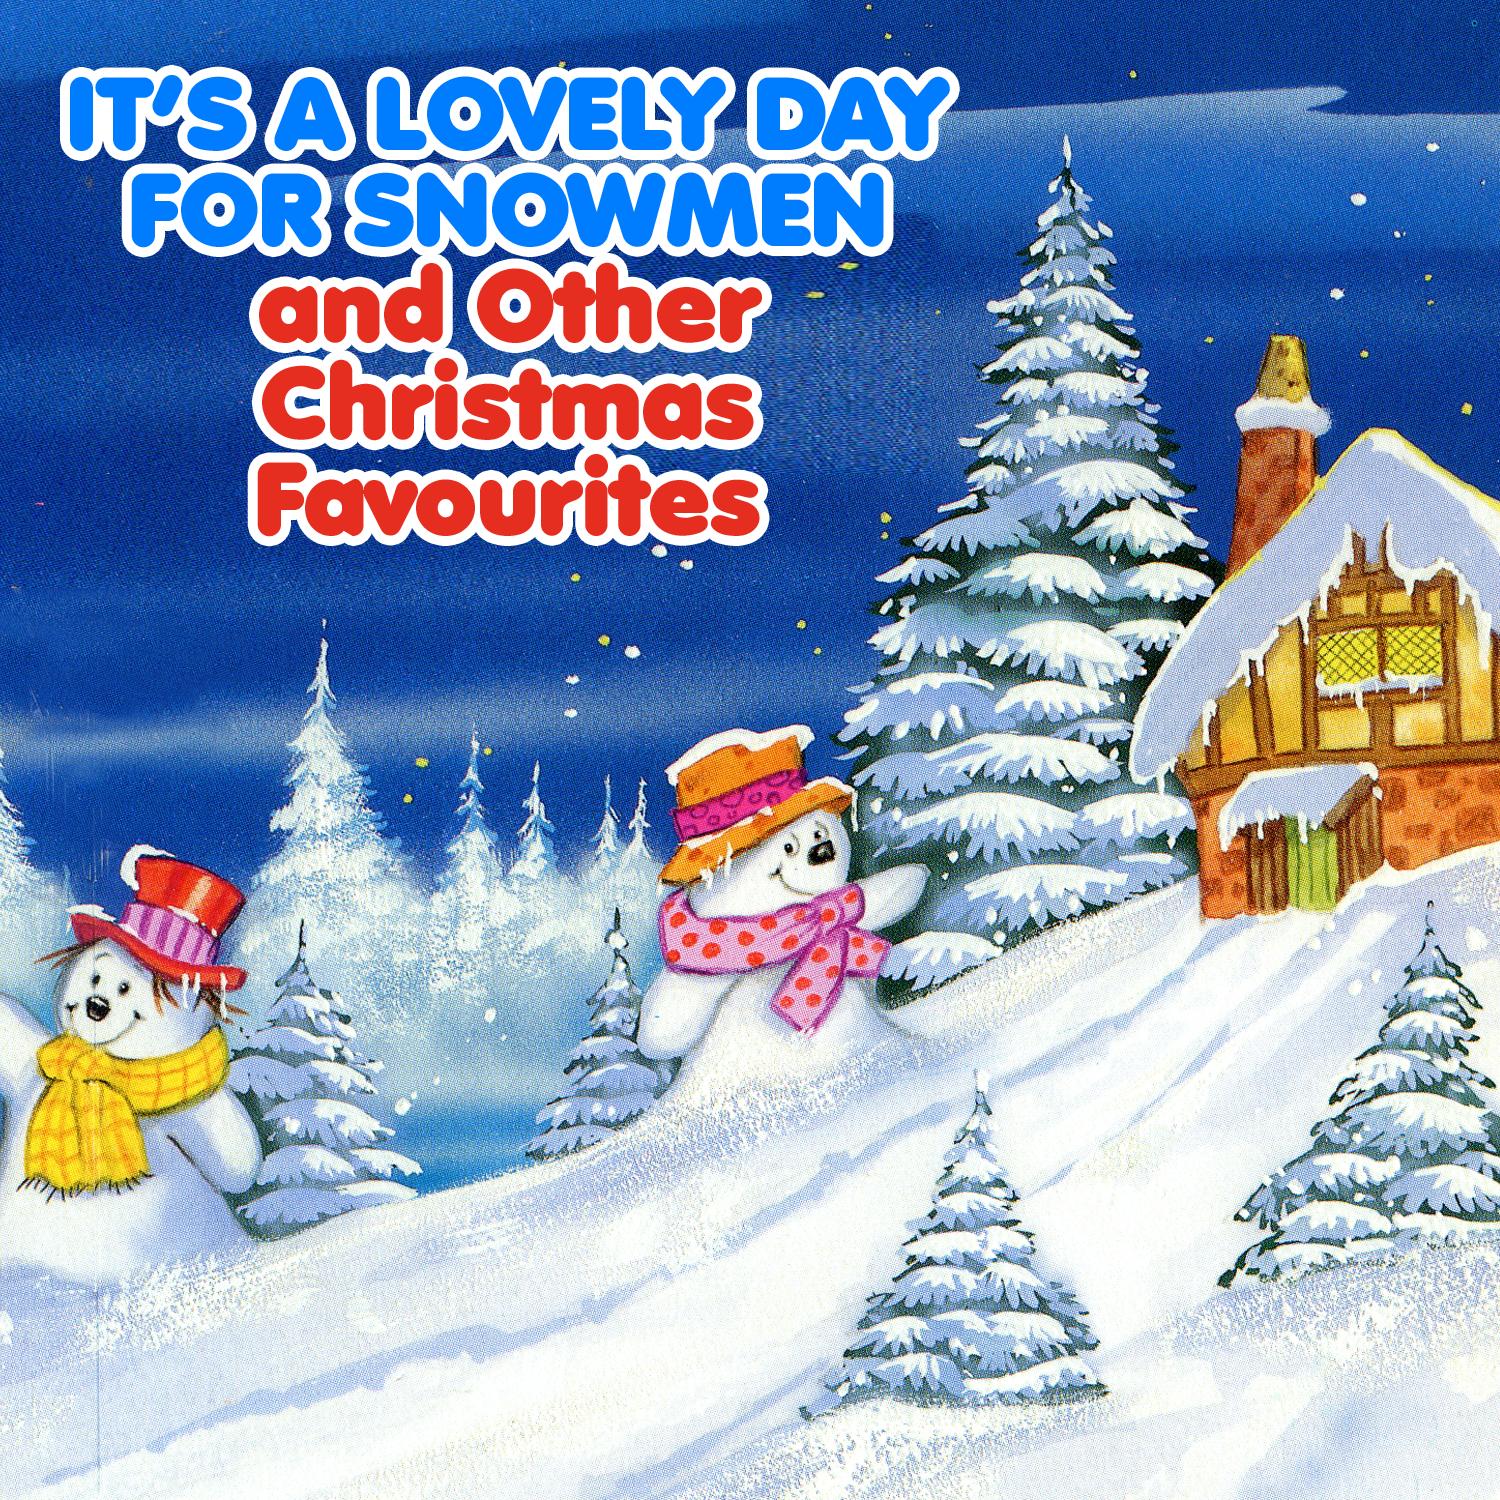 It's a Lovely Day for Snowmen and Other Christmas Favourites